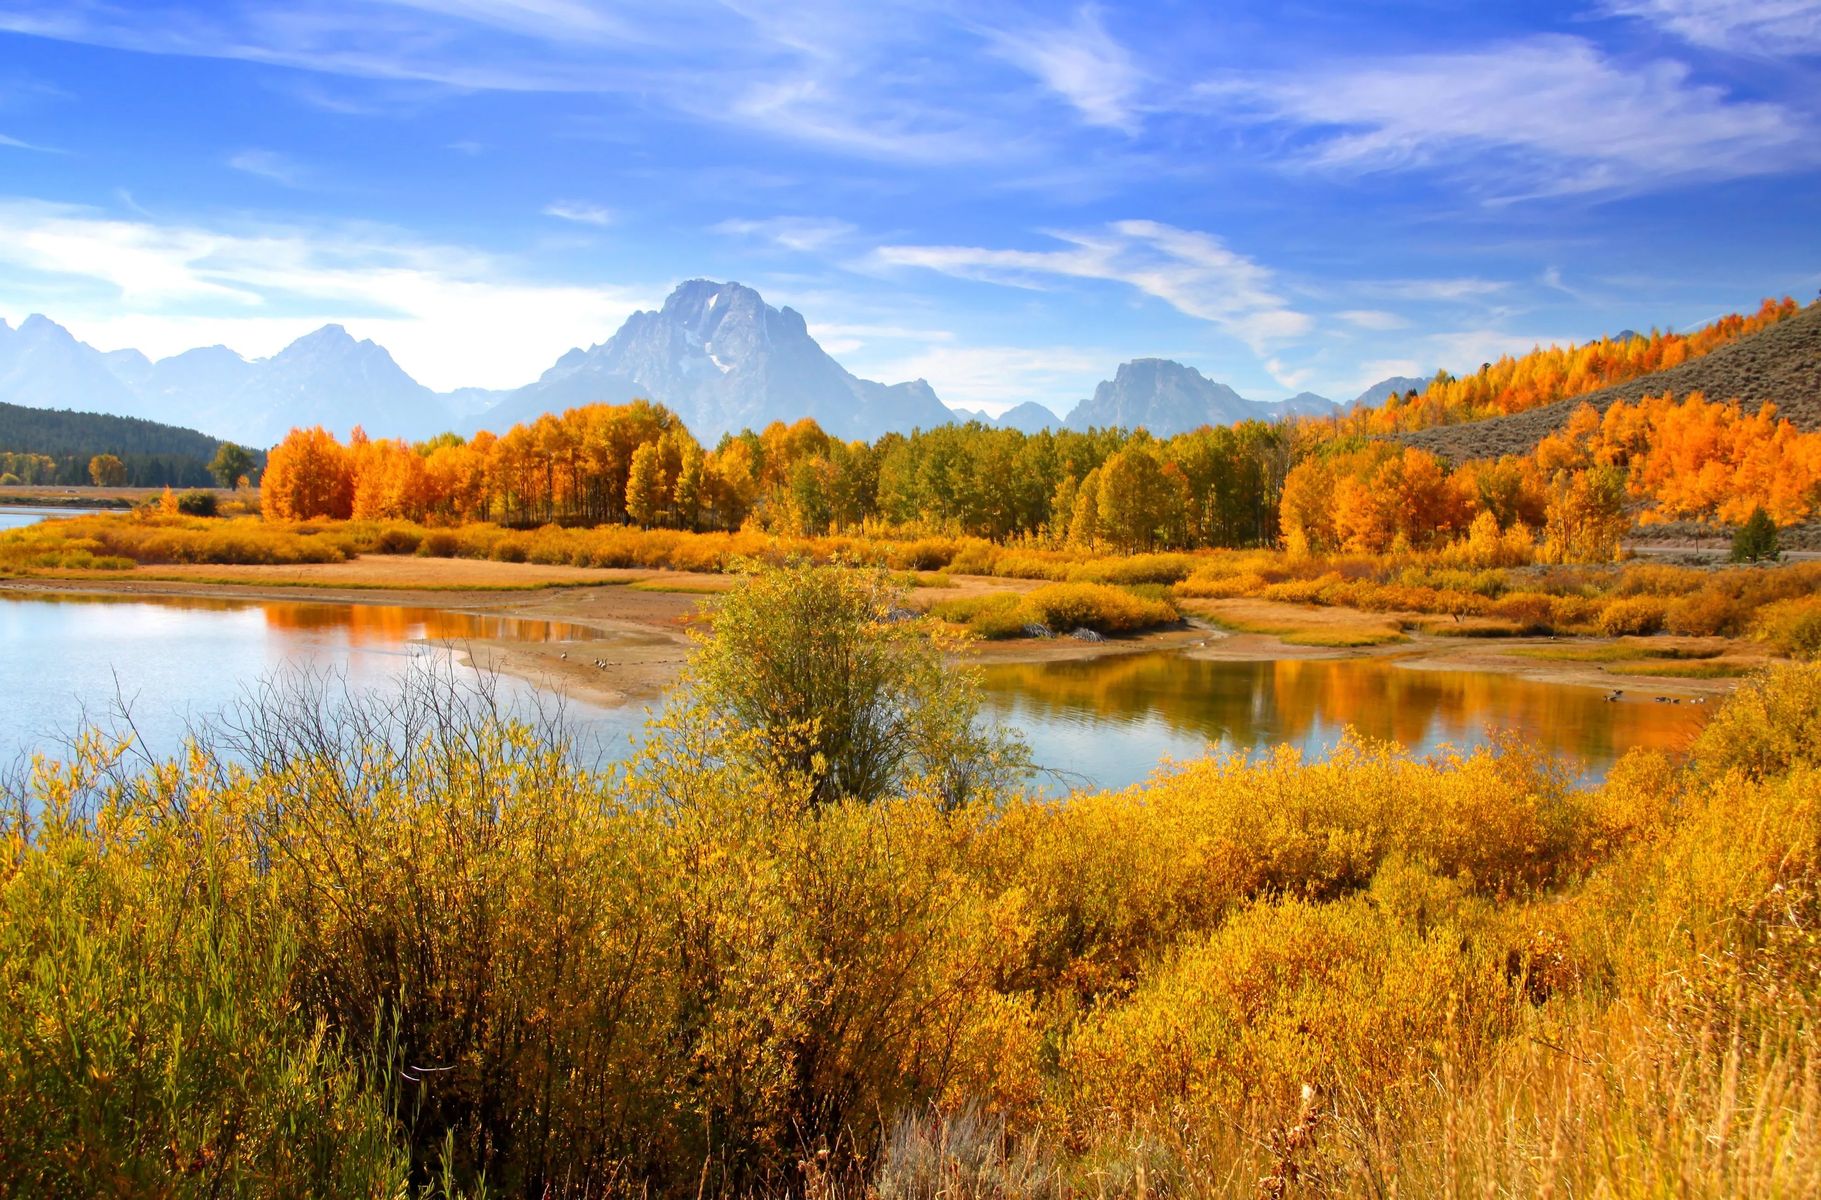 Where To Take A Scenic Road Trip For Fall Colors In The USA